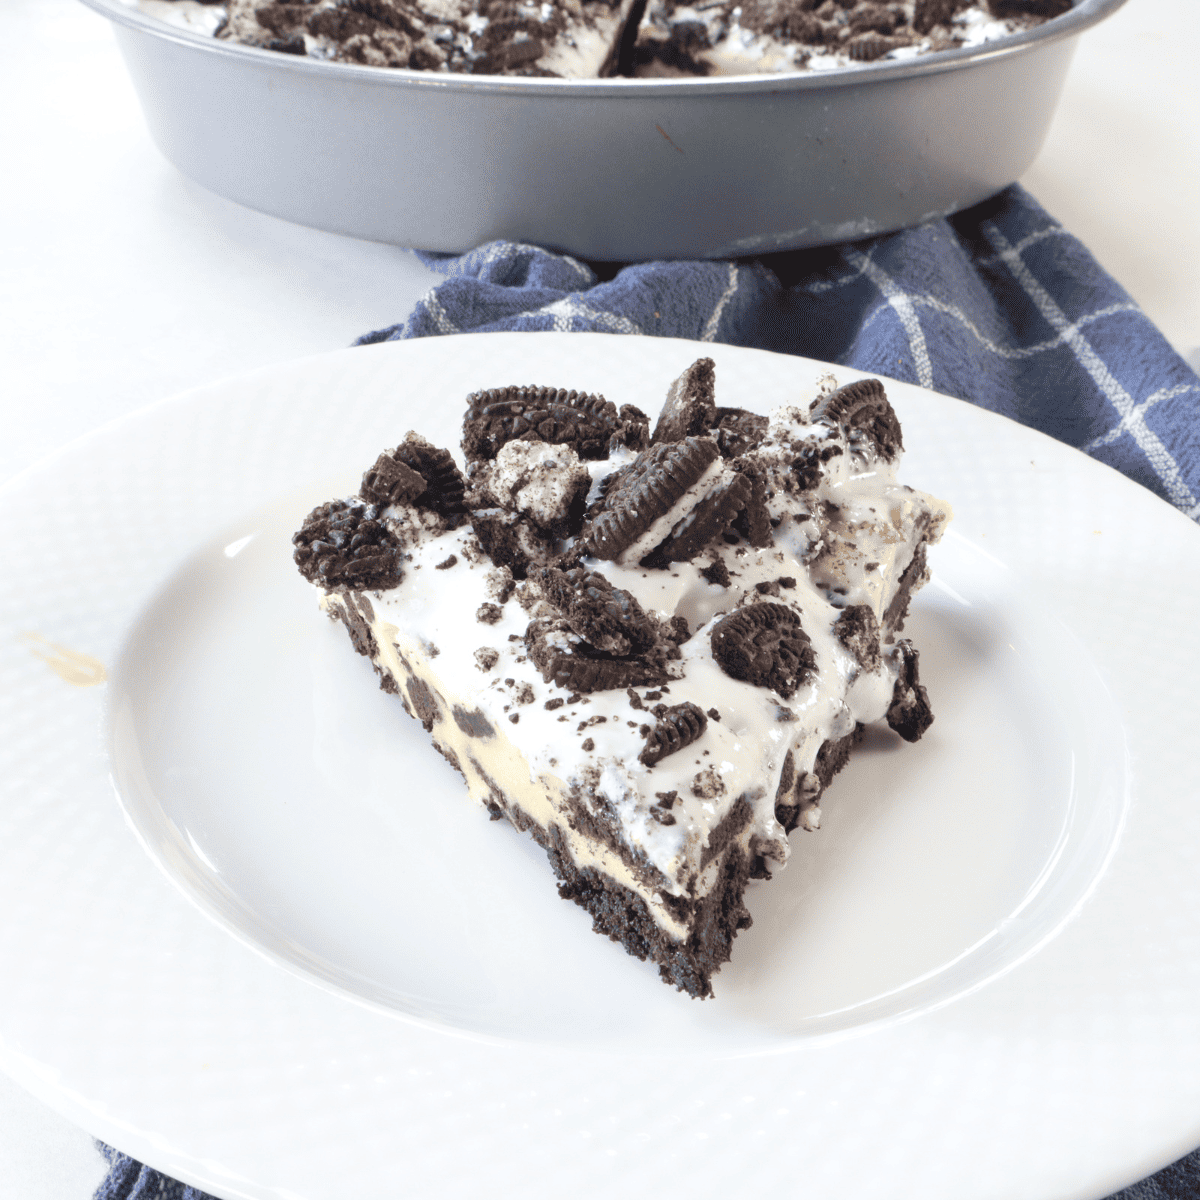 https://forktospoon.com/wp-content/uploads/2021/03/Air-Fryer-Oreo-Cheesecake-1.png